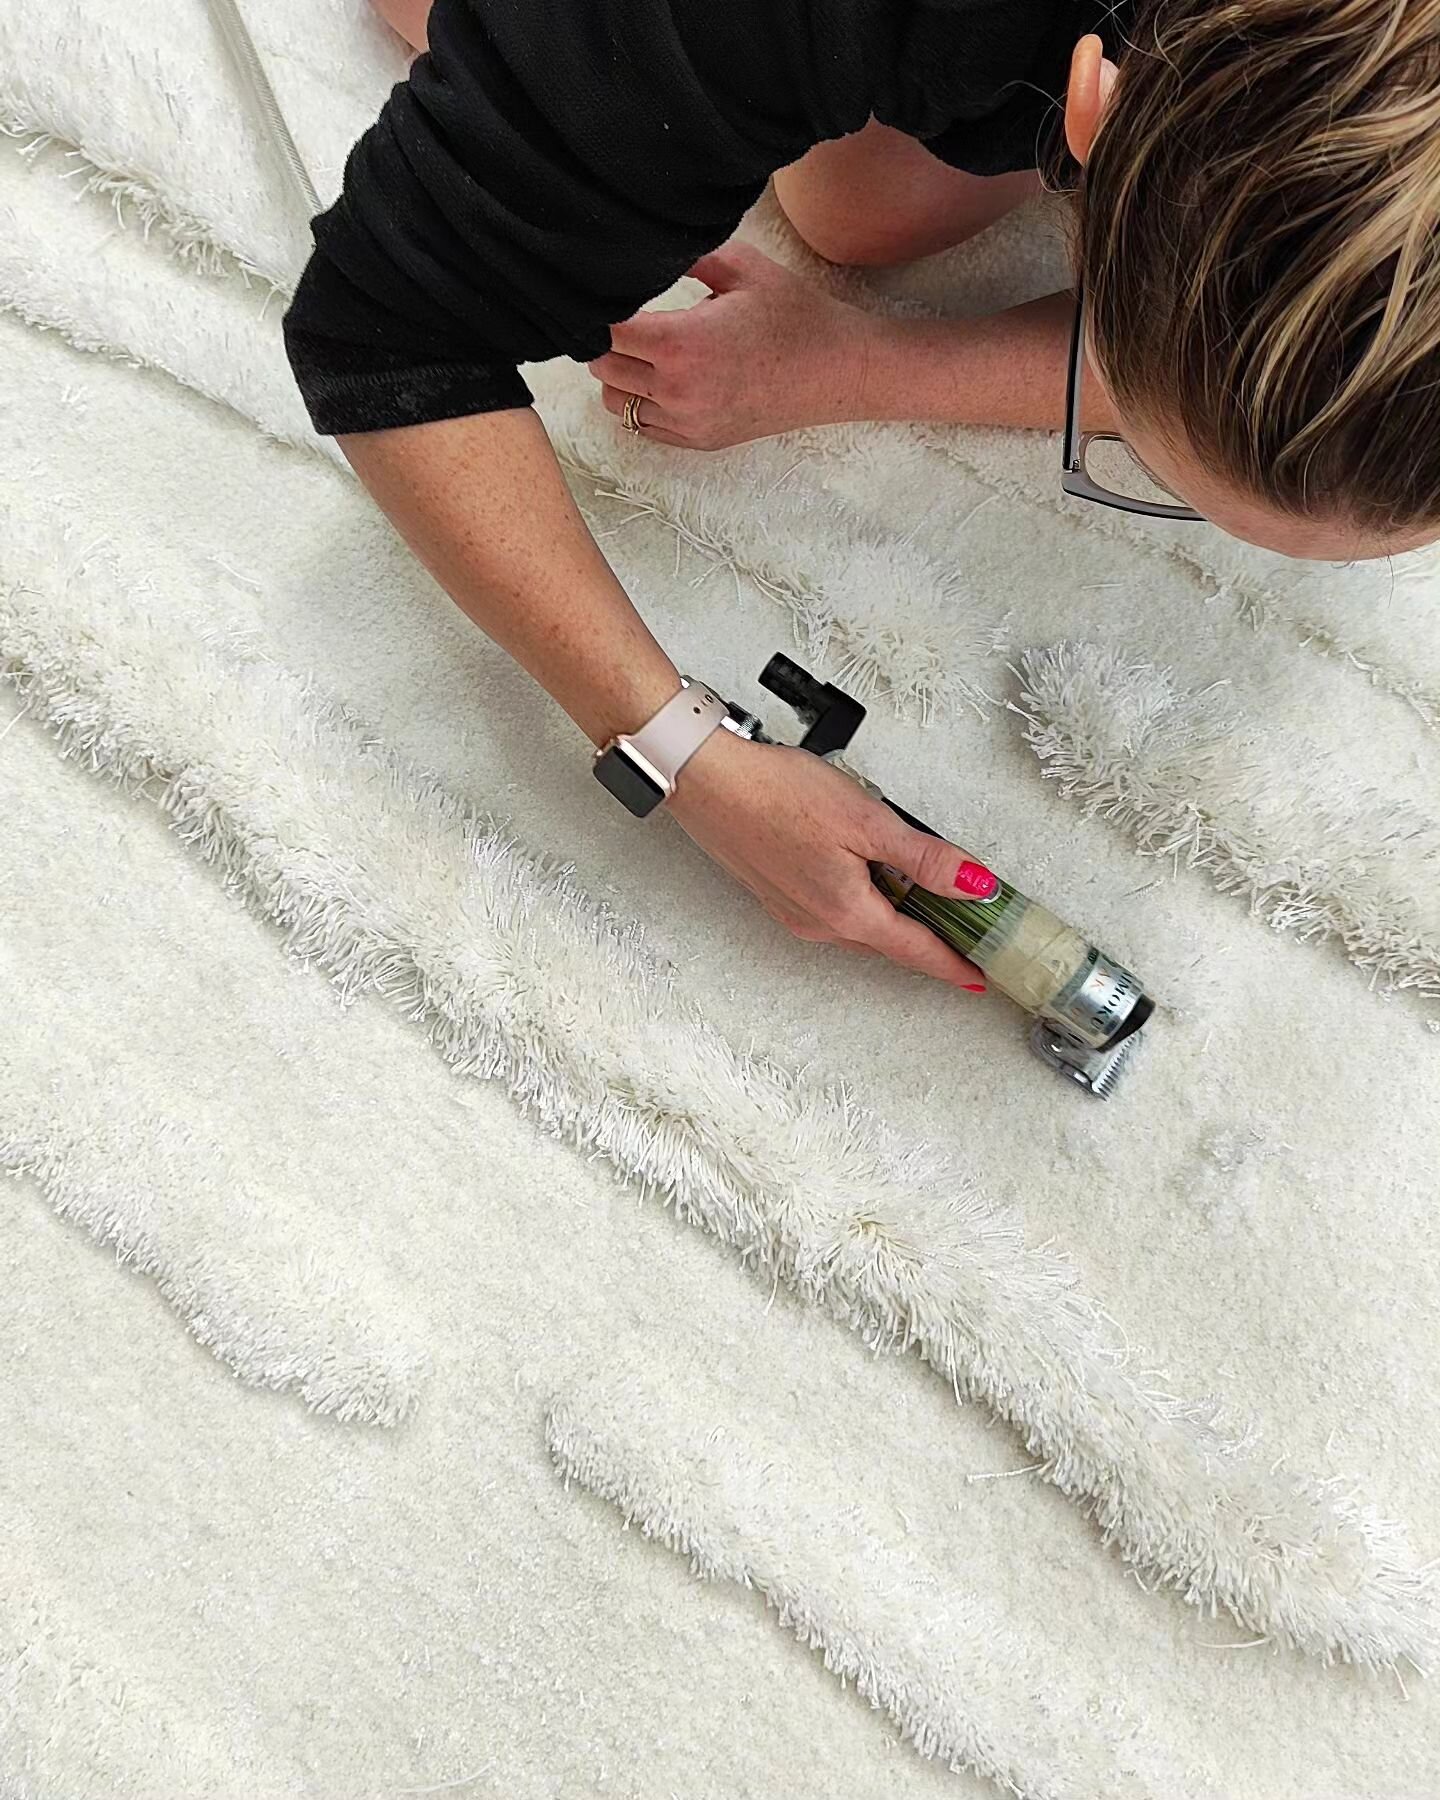 Here's a glimpse of the heavenly textured rug we are putting the finishing touches on. Stay tuned for the grand reveal tomorrow! 🌟

#comingsoon #staytuned #texturedluxury #texturedrug #whiterug #rugtexture #cronz